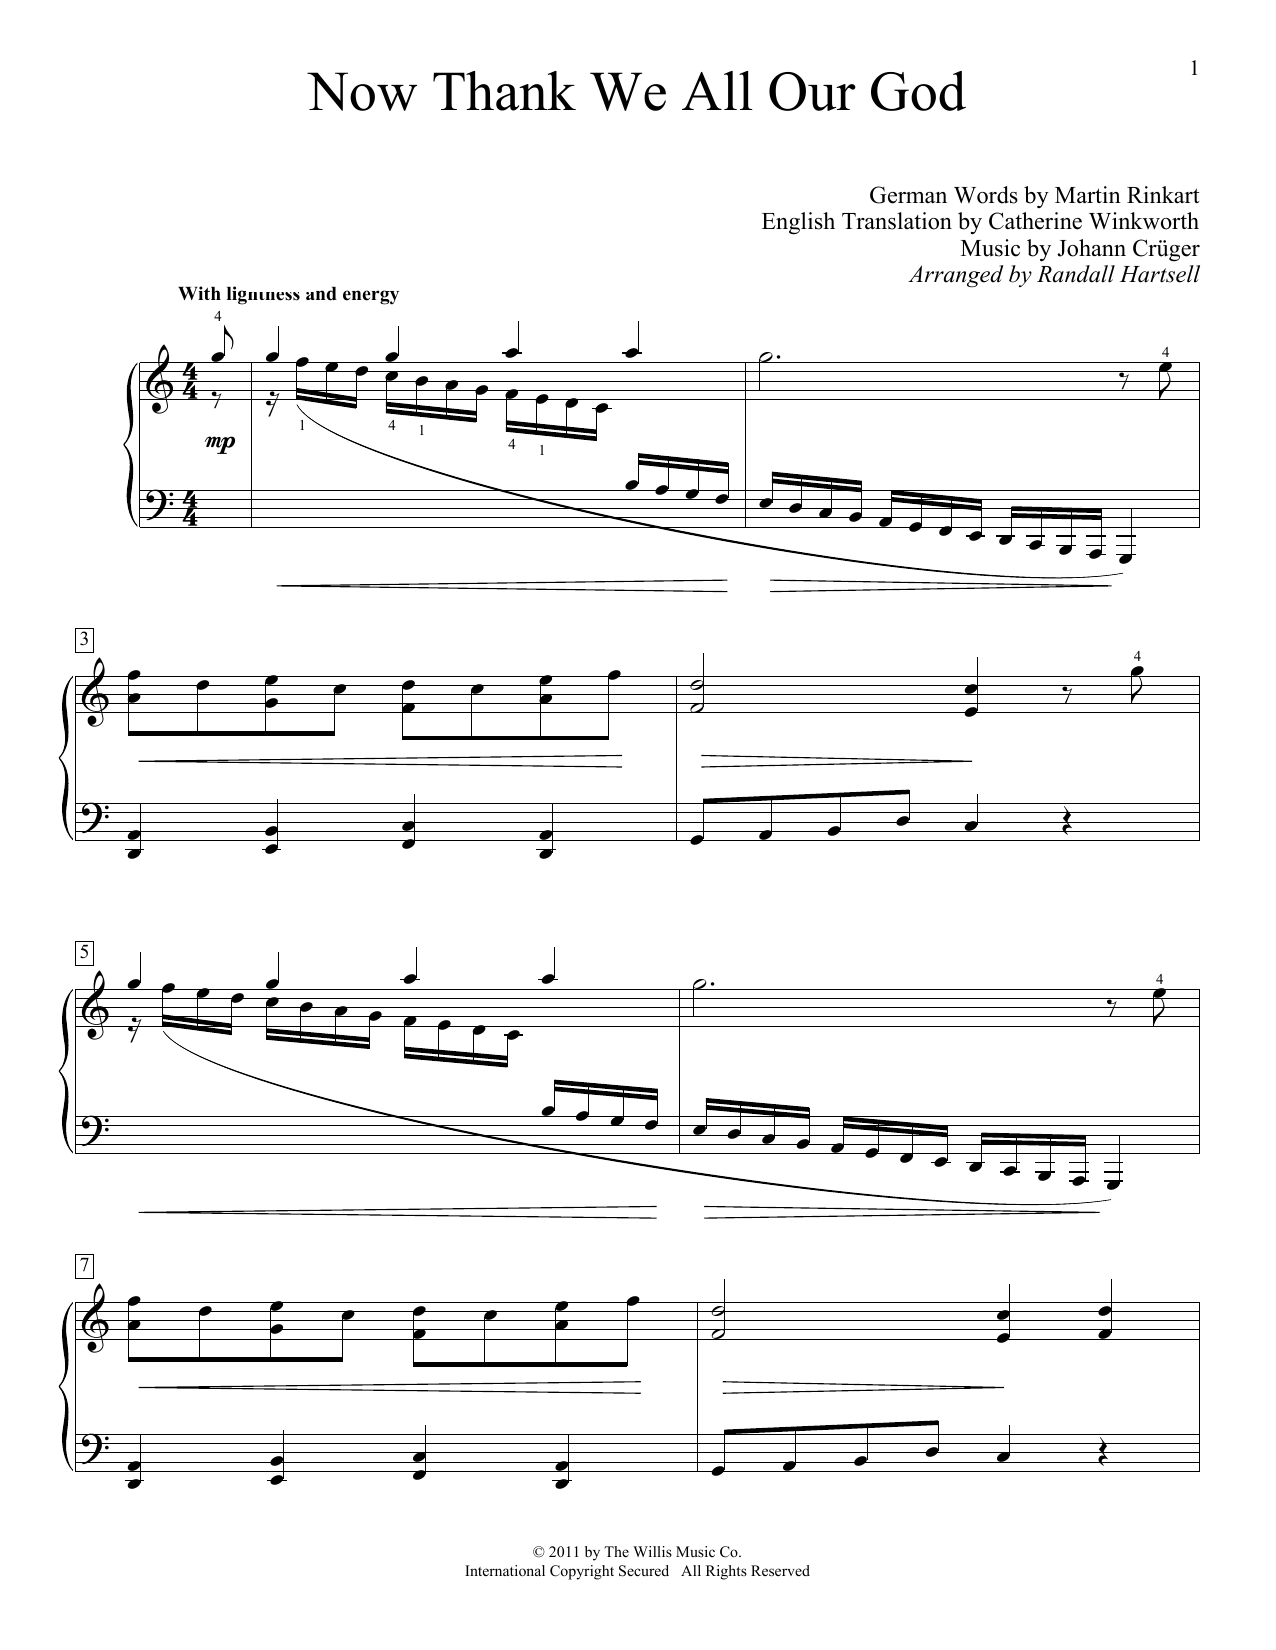 Martin Rinkart Now Thank We All Our God sheet music preview music notes and score for Piano including 3 page(s)